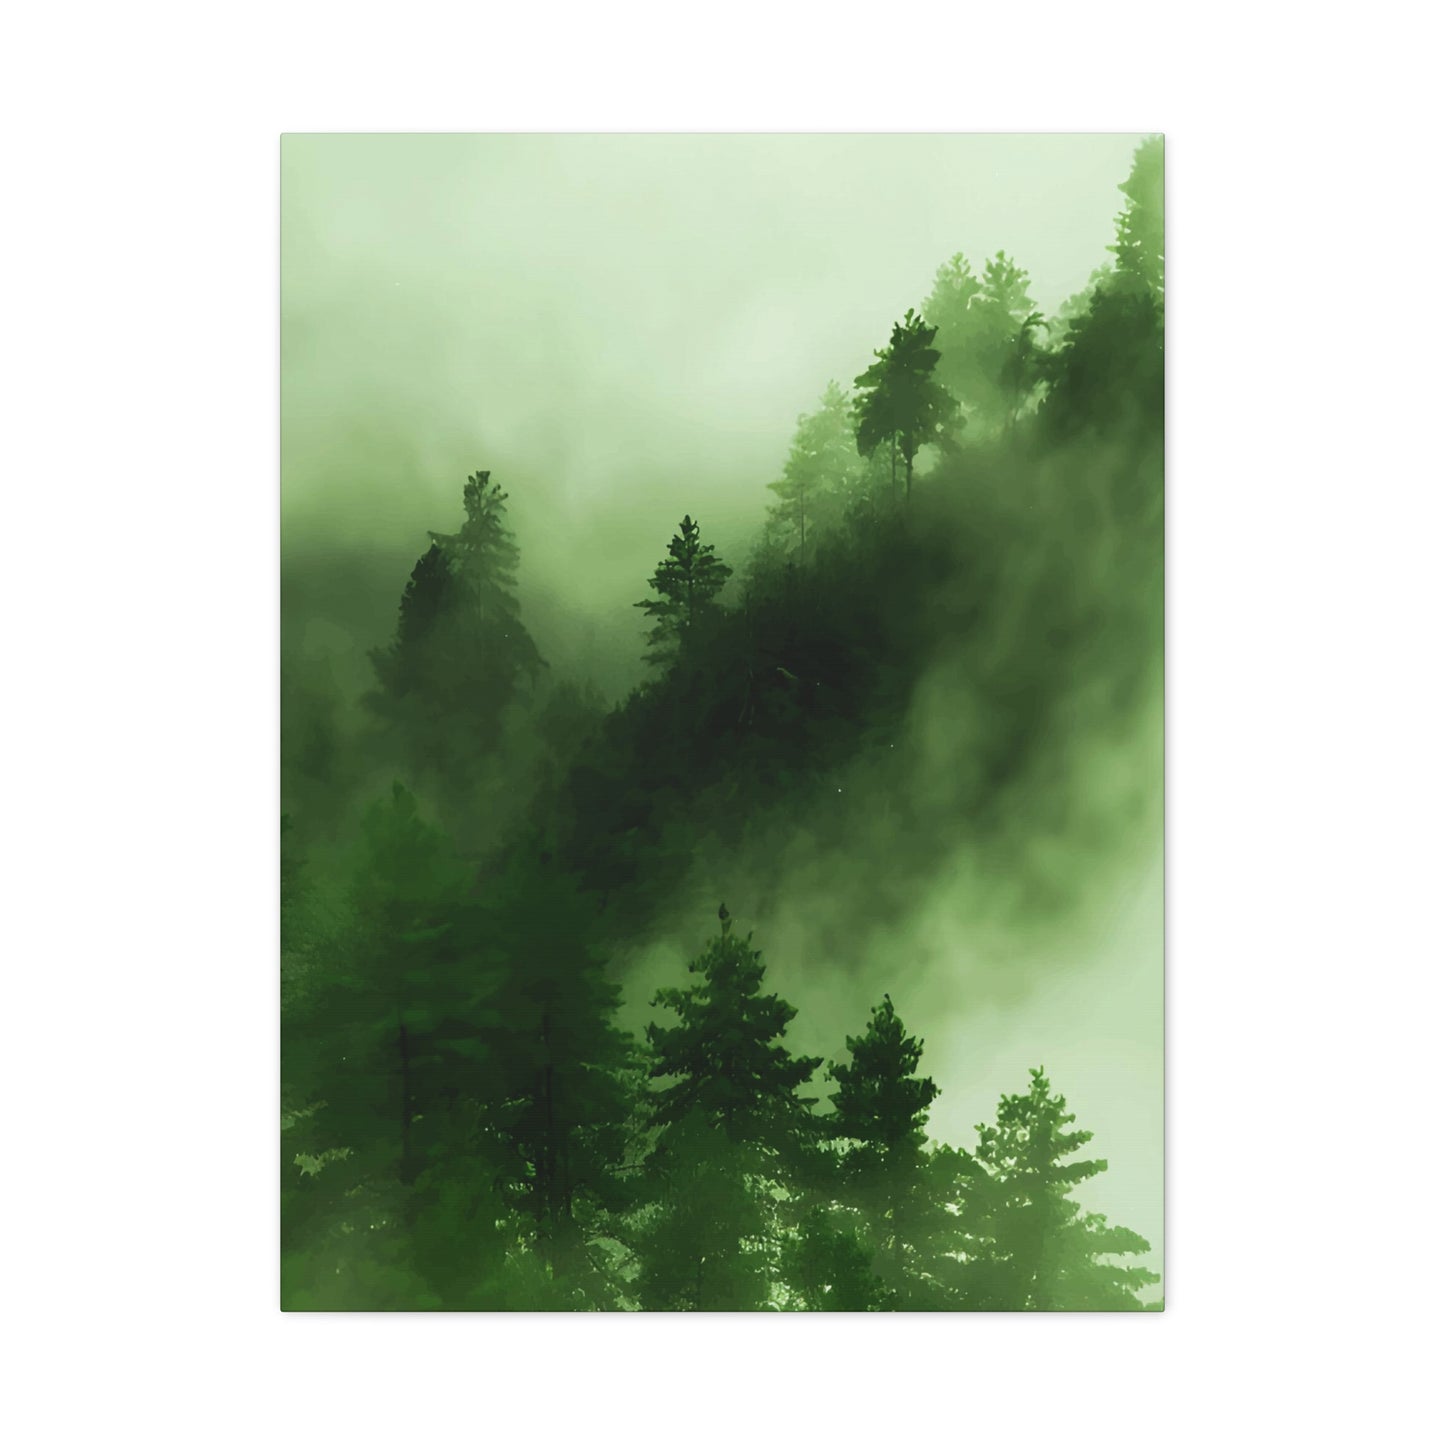 Mist in the Forest Wall Art & Canvas Prints